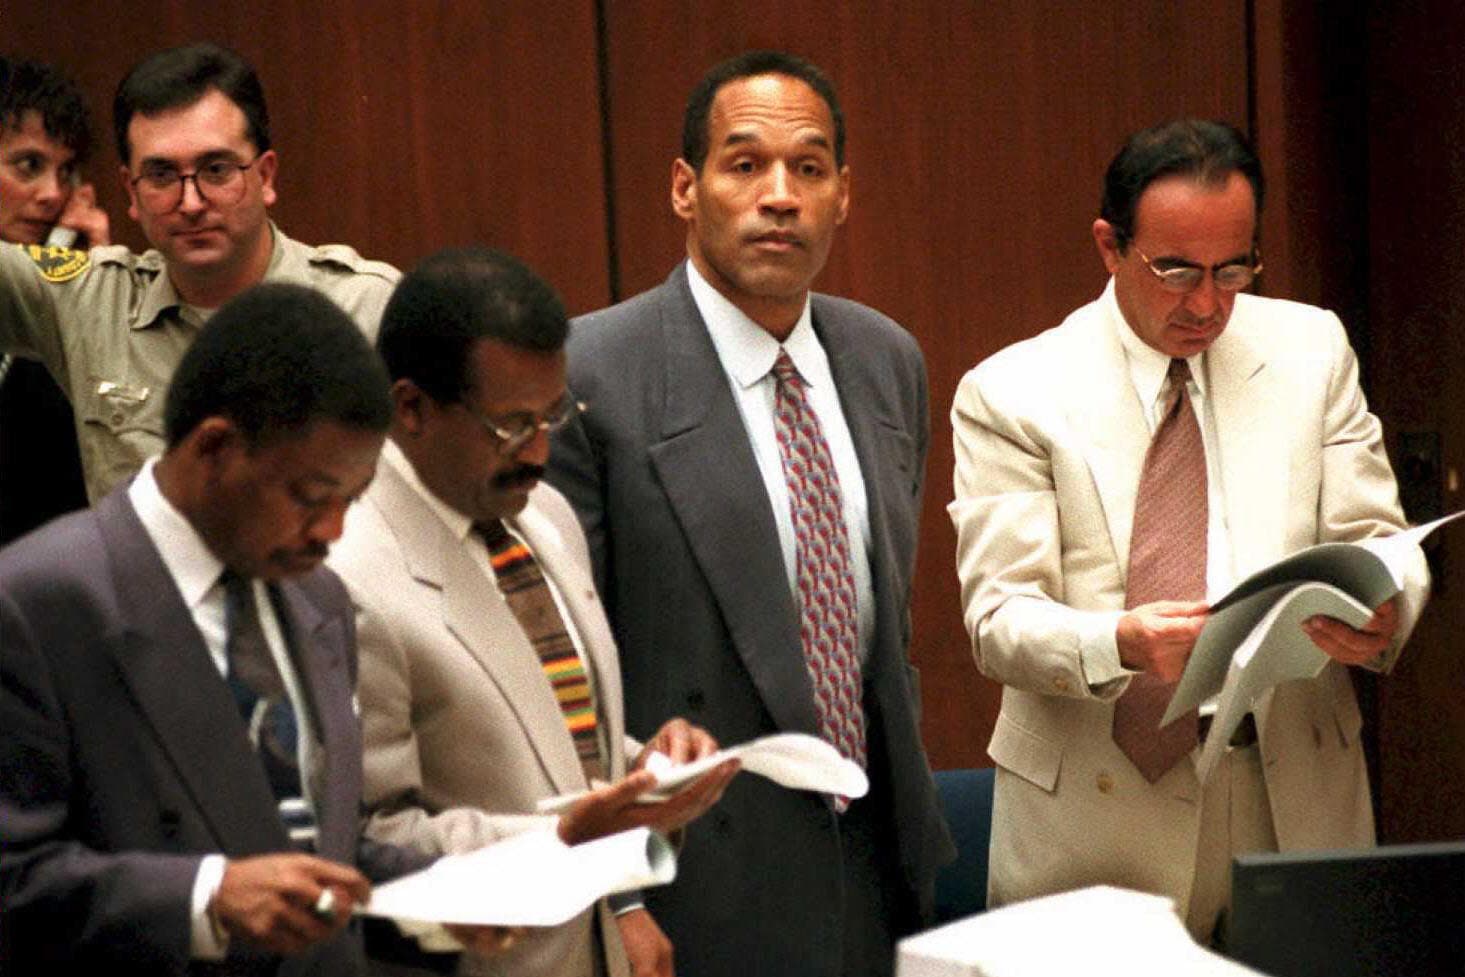 how long did the oj simpson jury deliberated